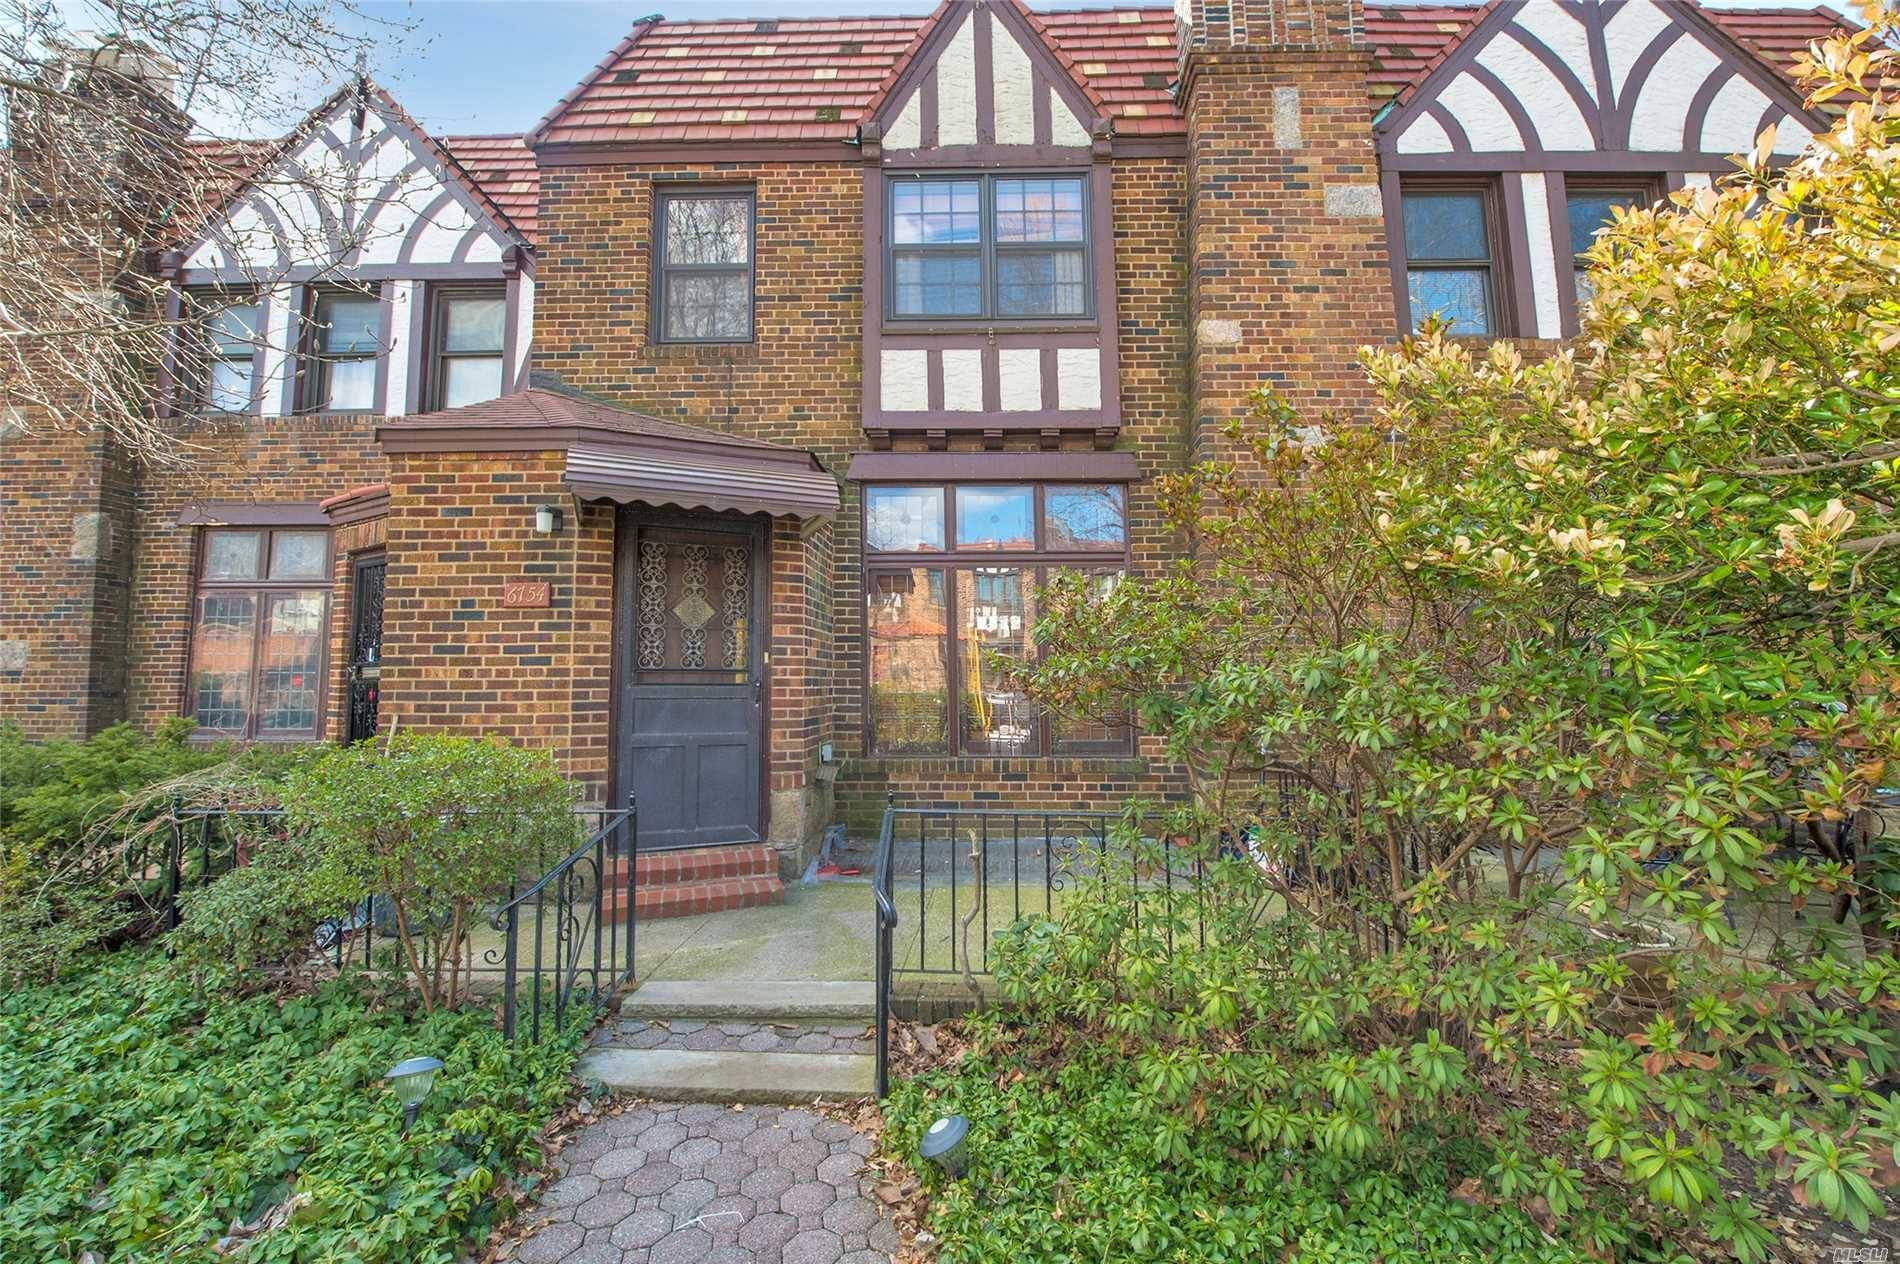 Brick 3 Bedroom Townhouse In The Heart Of Forest Hills On A Quiet Block.